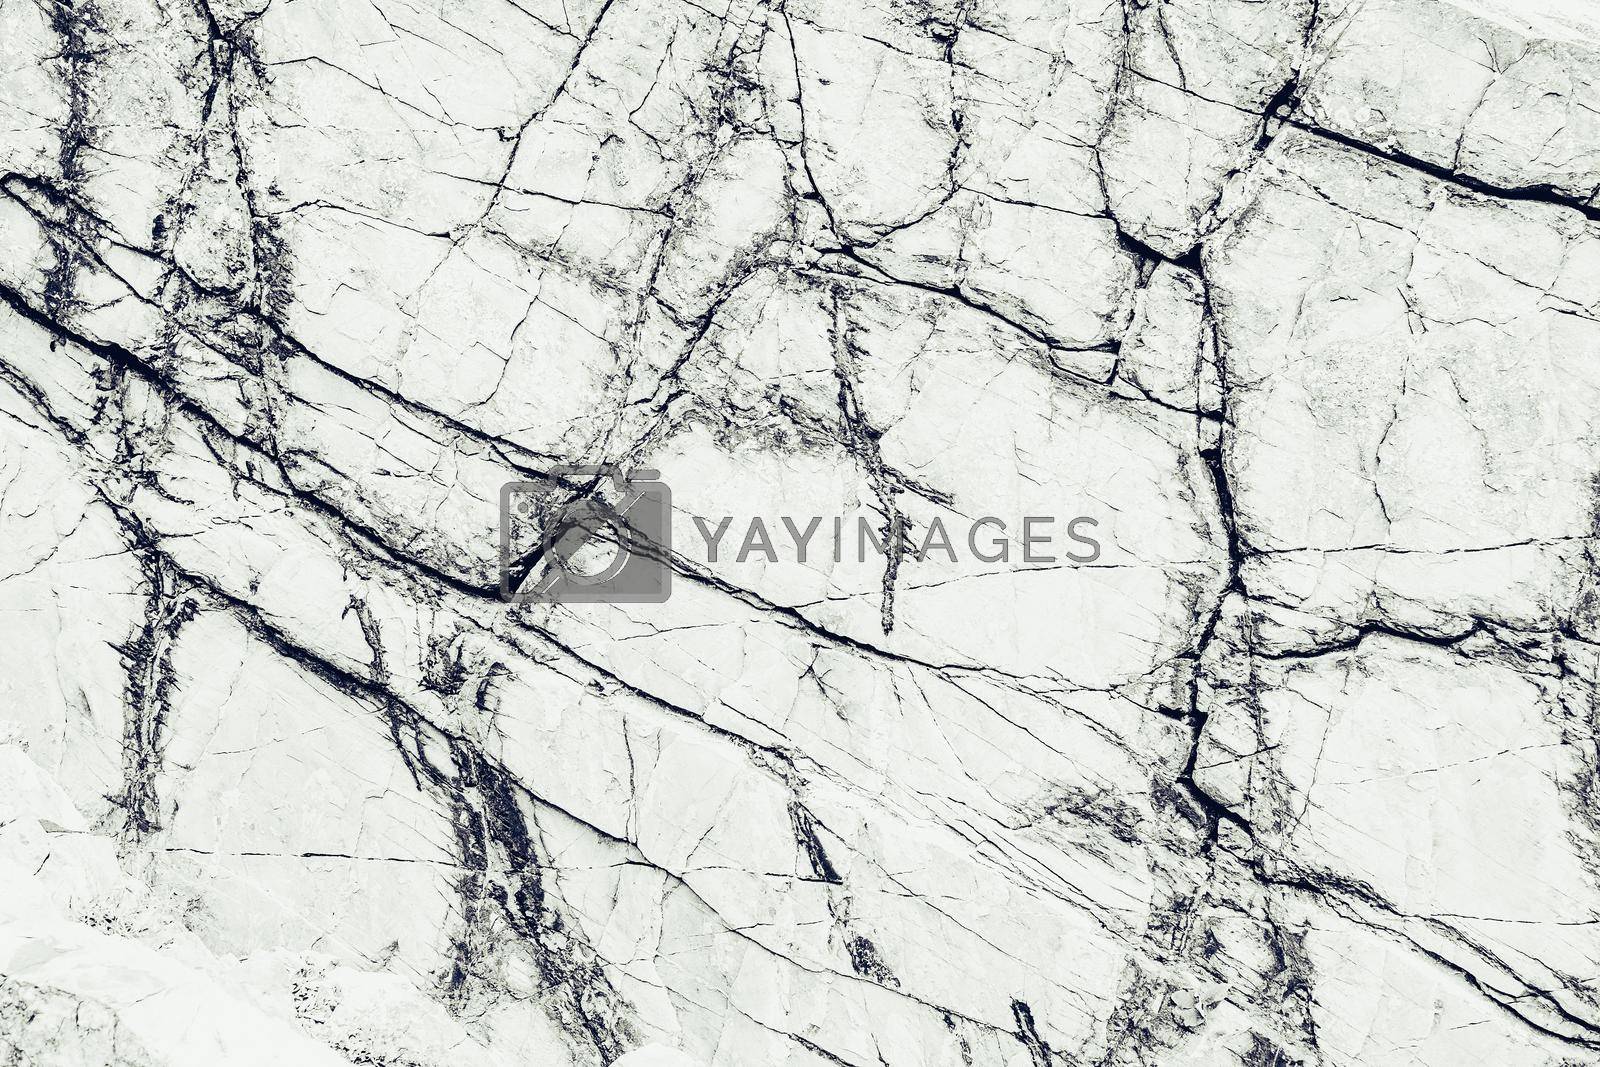 Rough surface of white rocky stone, texture for background